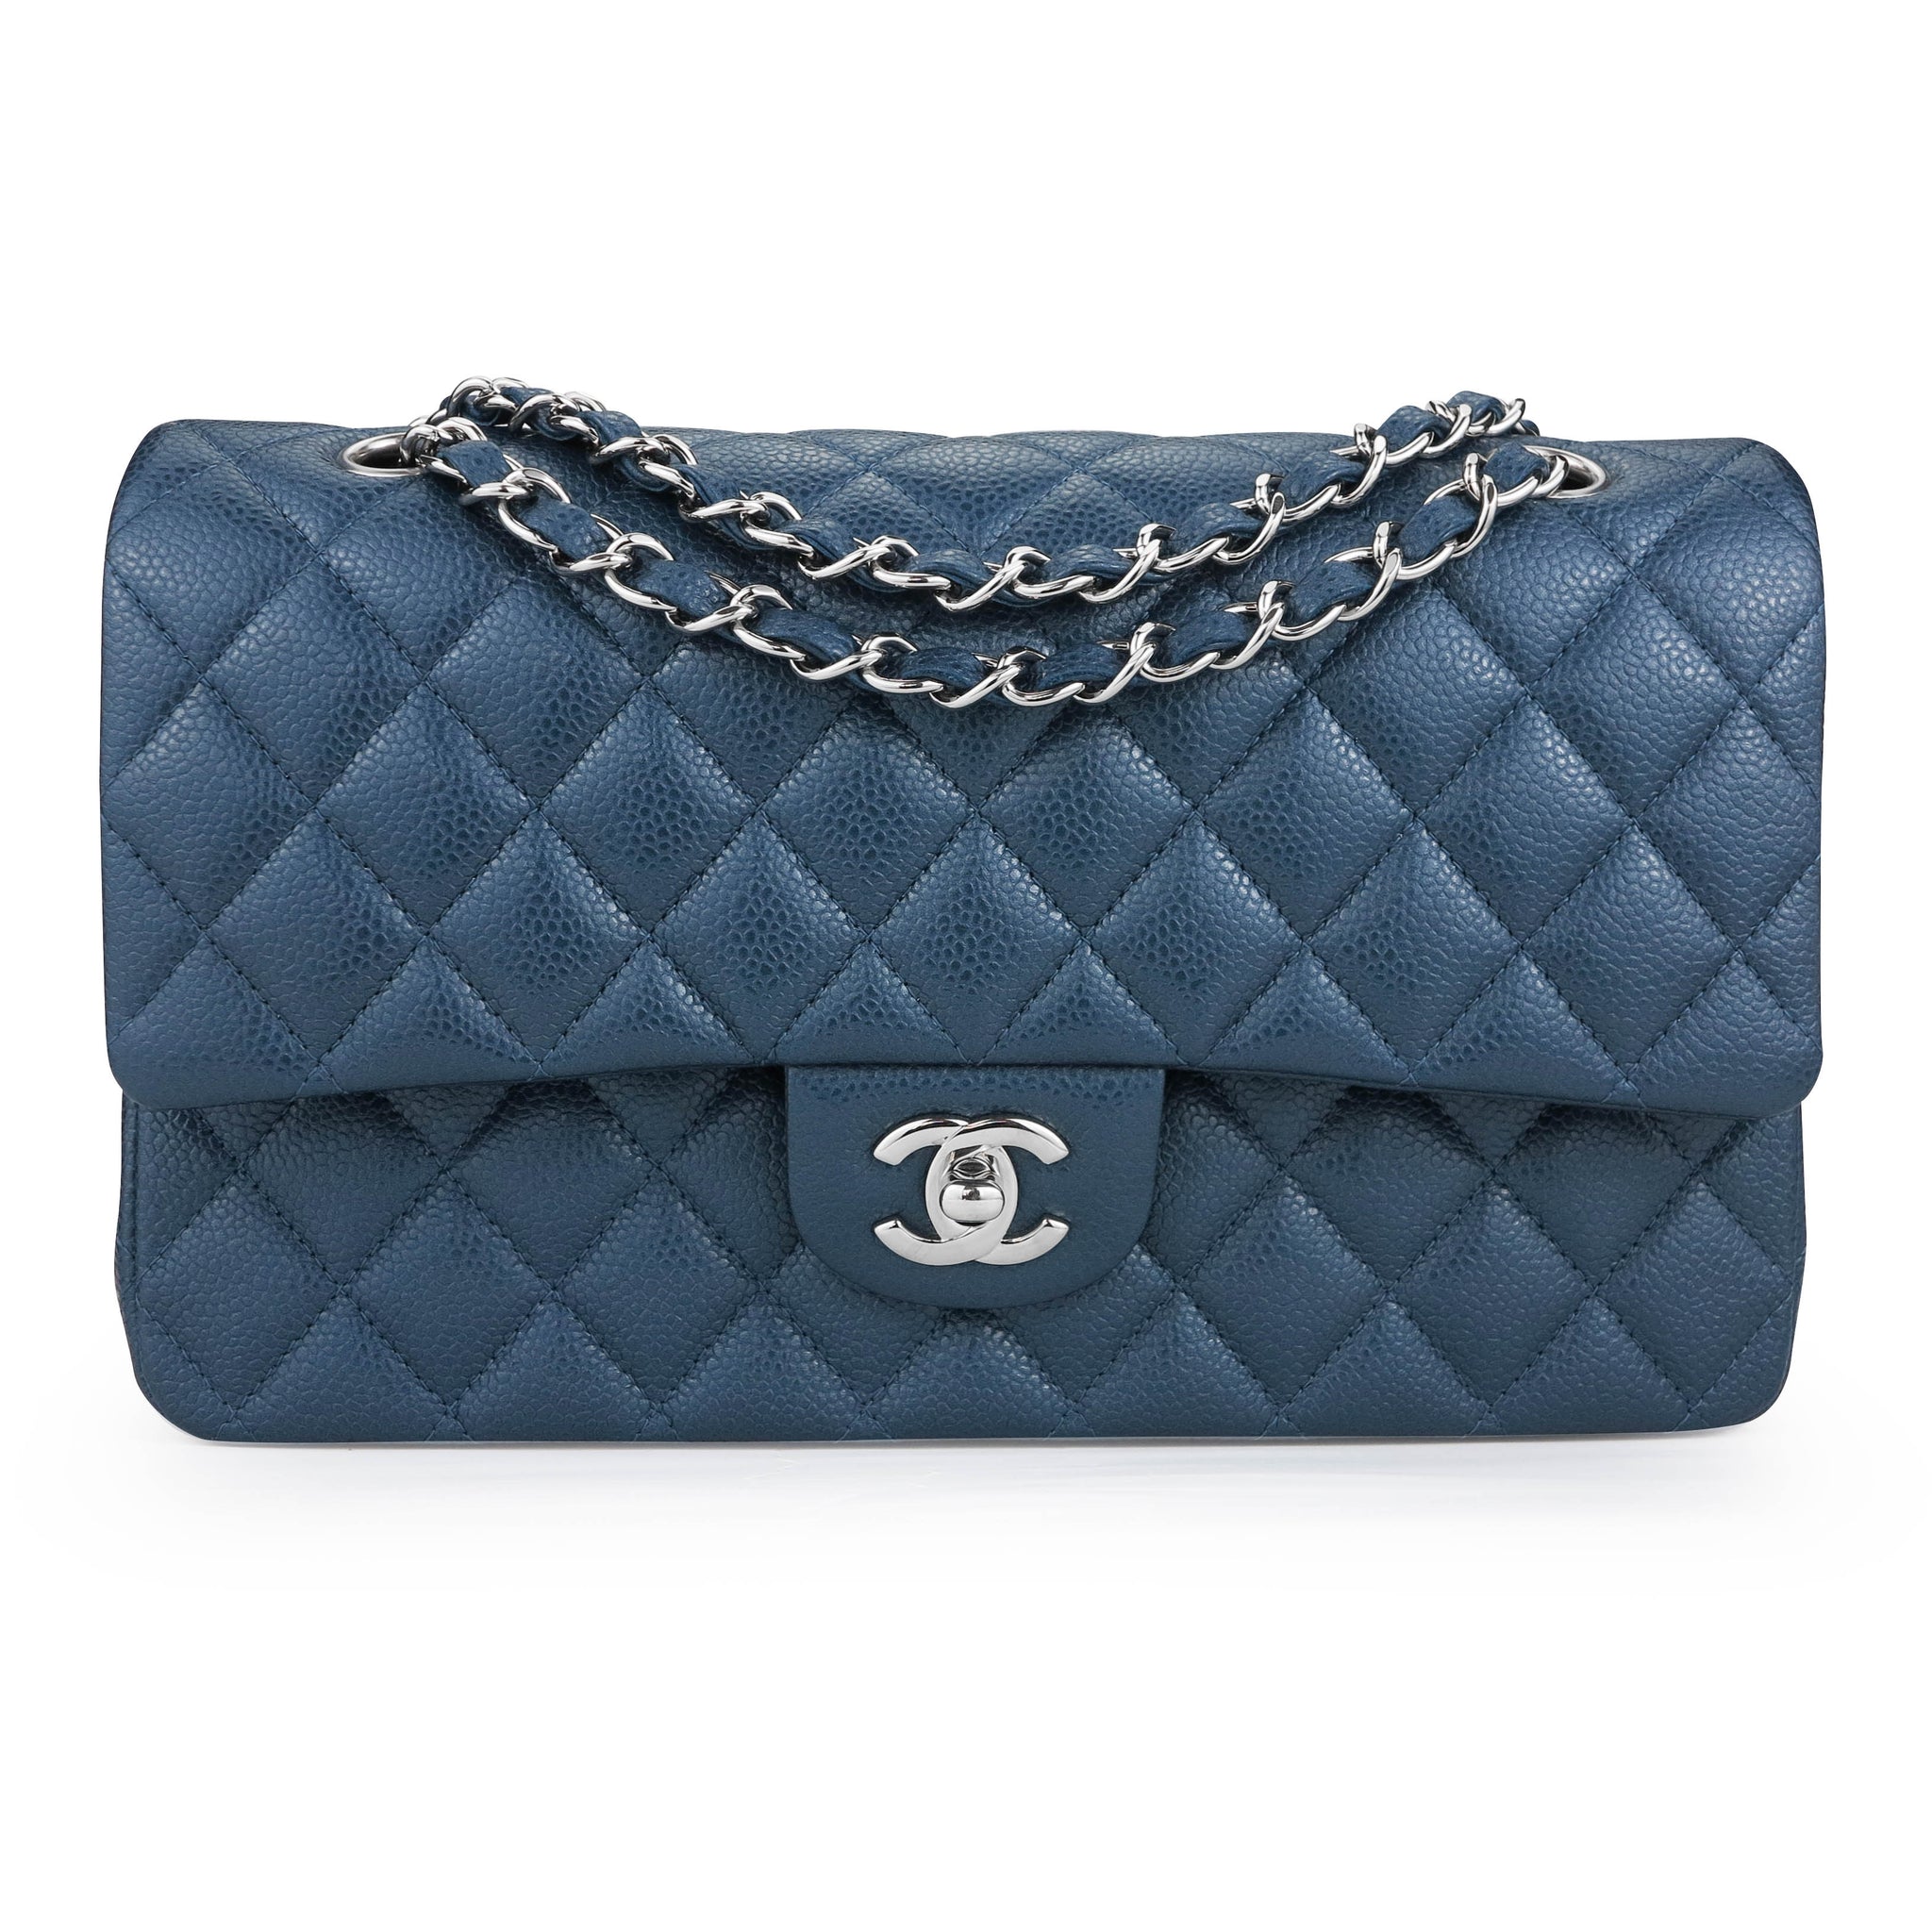 CHANEL Medium Classic Double Flap Bag in 15C Pearly Caviar - Dearluxe.com